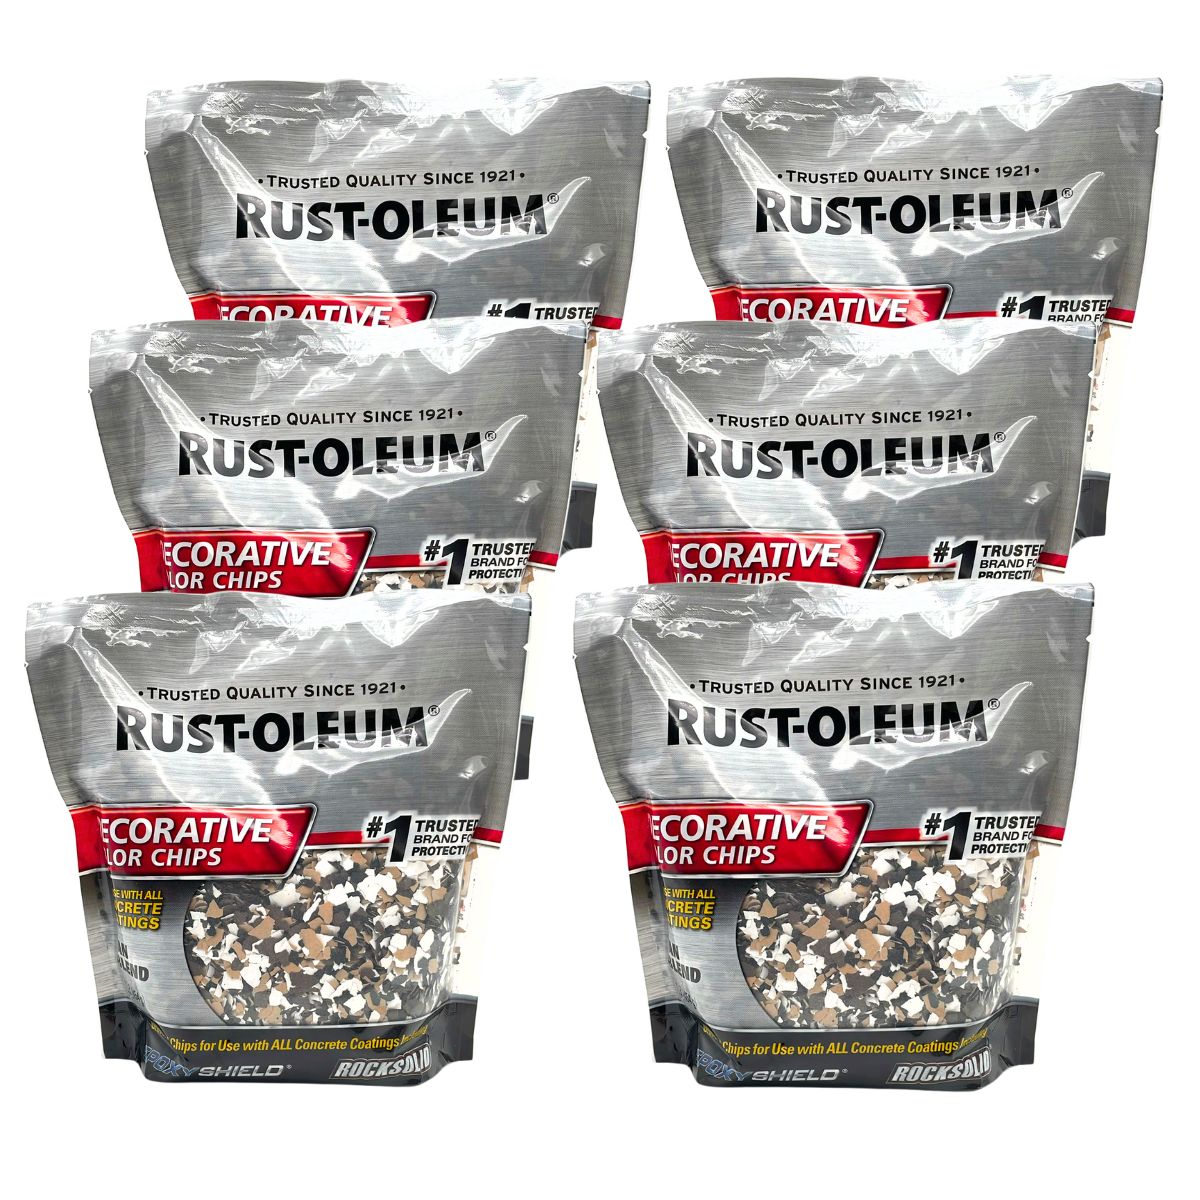 (6 Pack) Rust-Oleum Decorative Color Chips | Tan Blend 454g - South East Clearance Centre